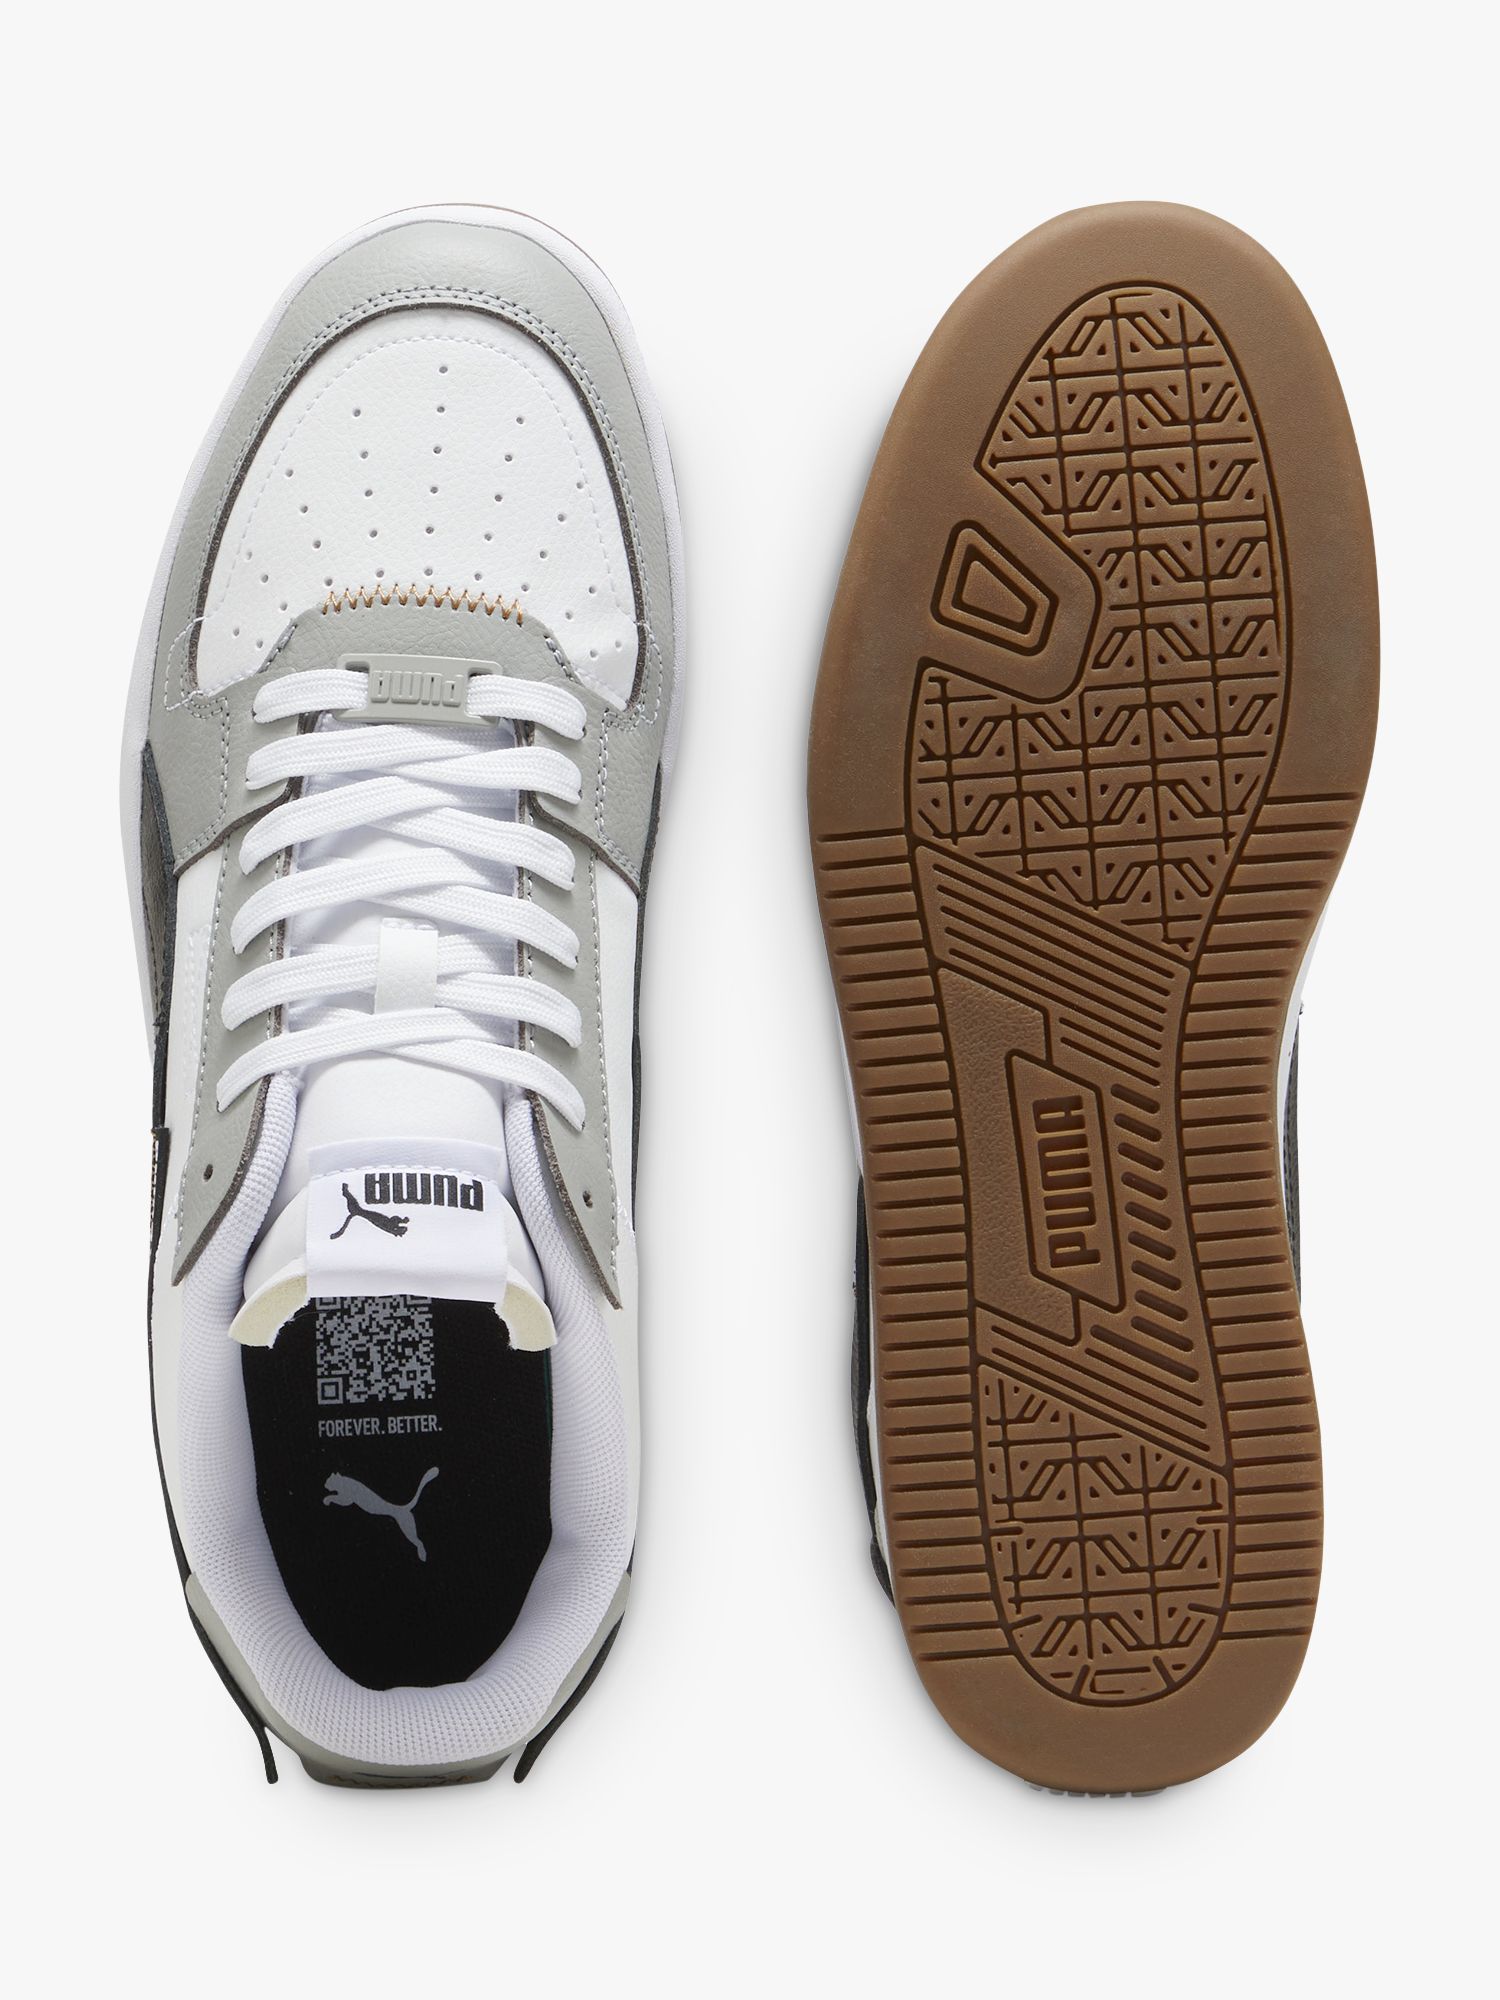 Buy PUMA Classic Caven 2 Lux Trainers Online at johnlewis.com